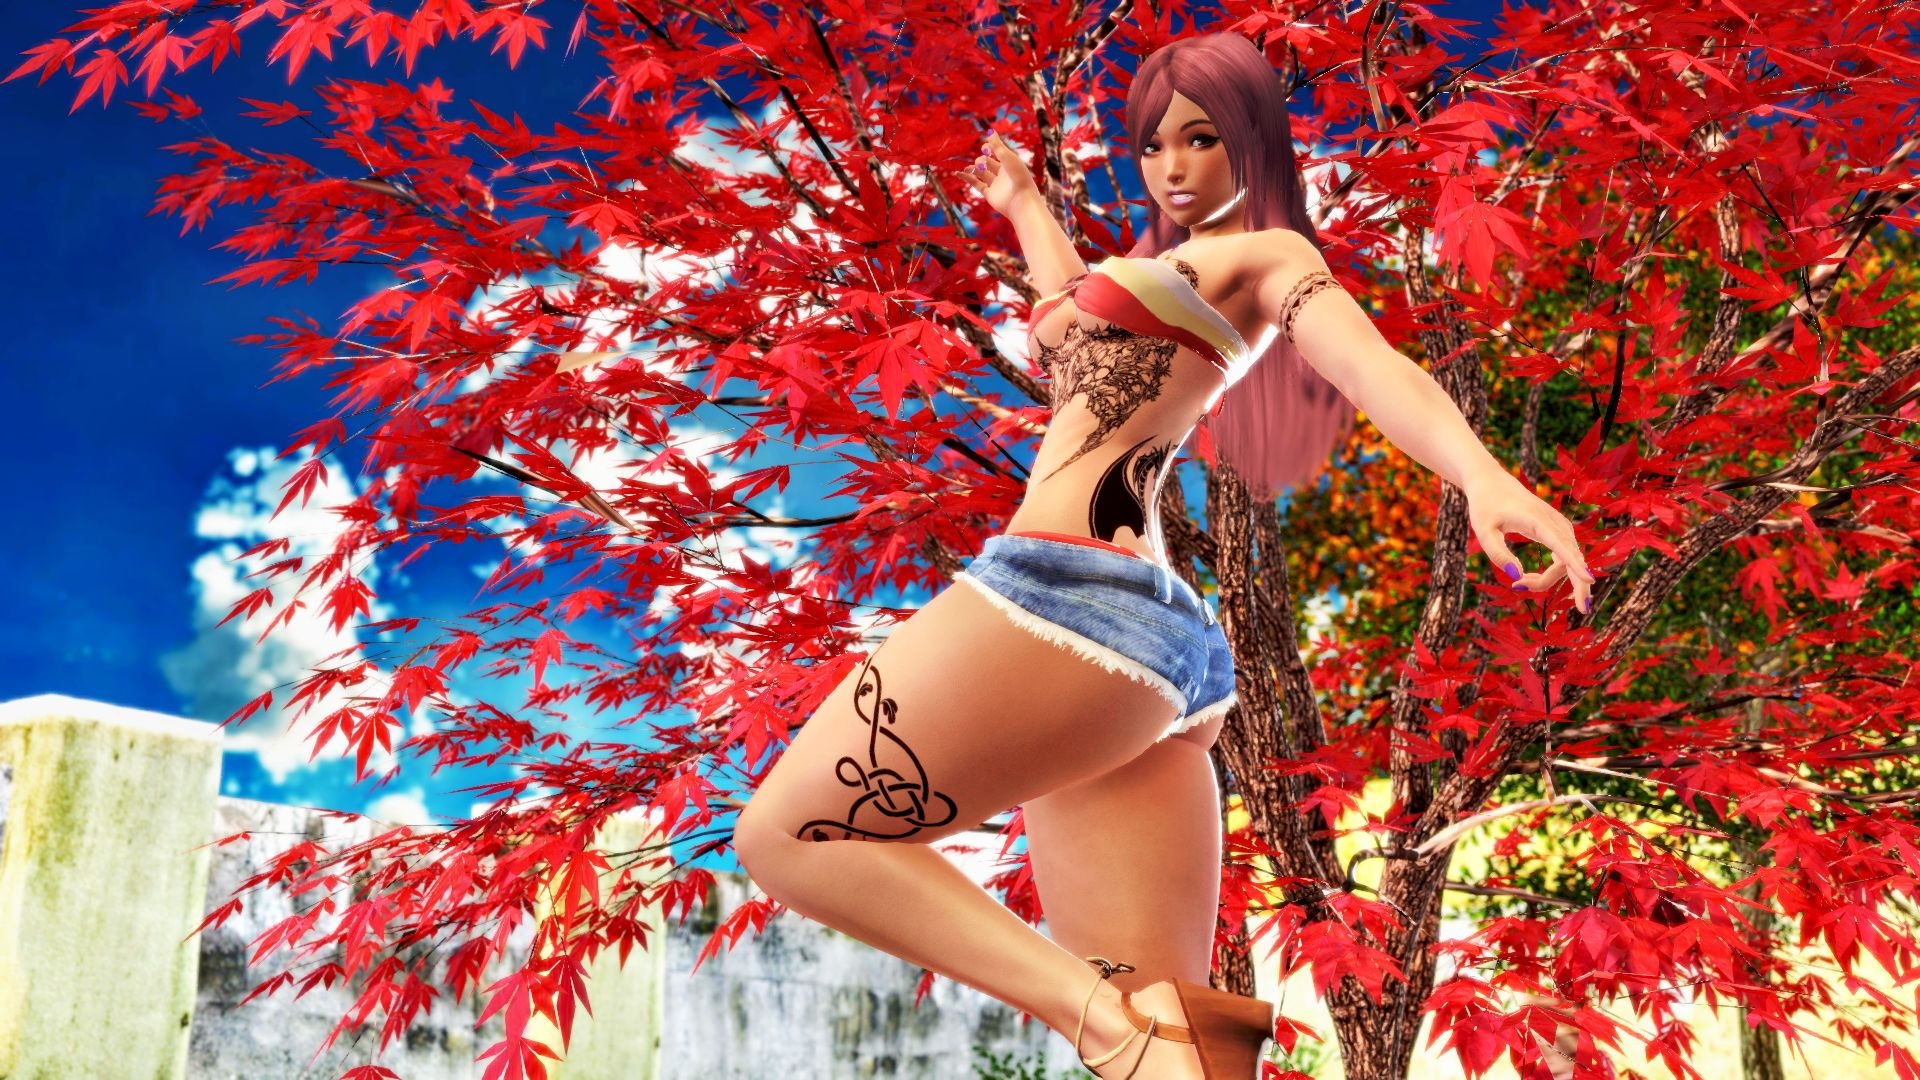 Tiffany At The Park Honey Select Stripper Endowed Adult Games Nsfw Games 3d Porn Porn Game Thicc Thick Thighs Tattoo Tattoos 3